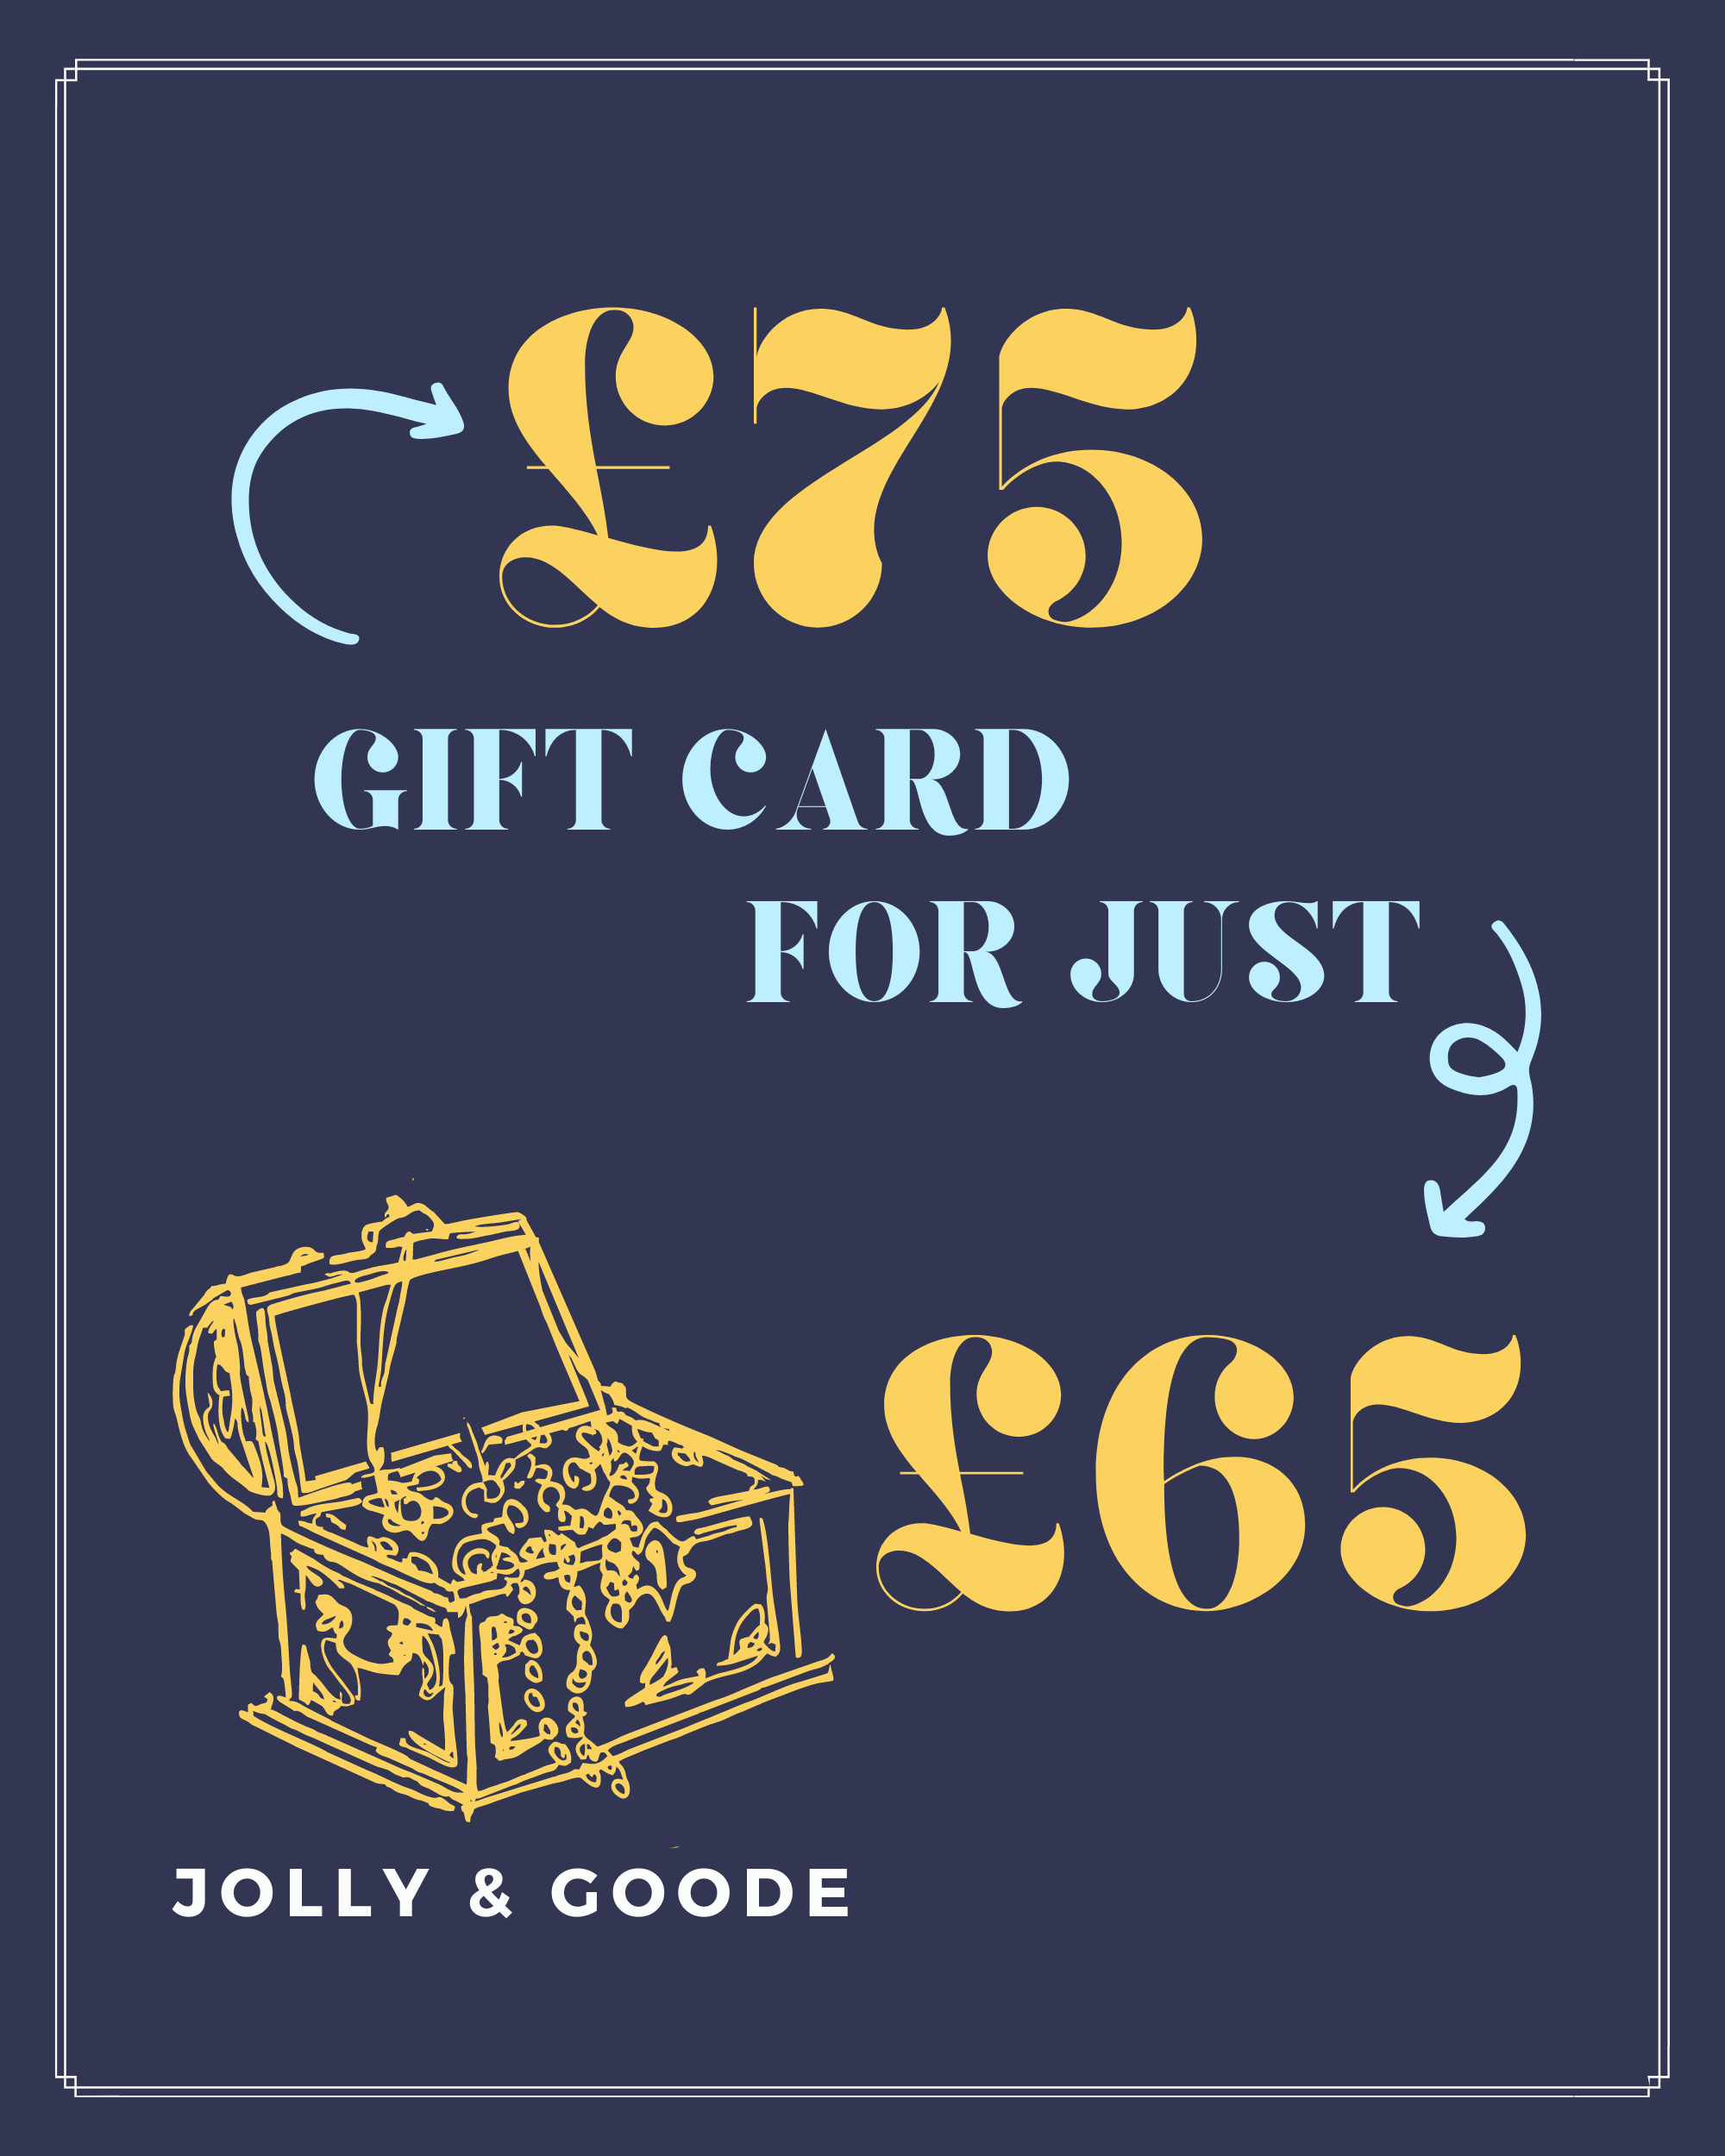 Discounted Gift Cards £75 Gift Card for £65 Gift Cards Jolly & Goode Gift Cards